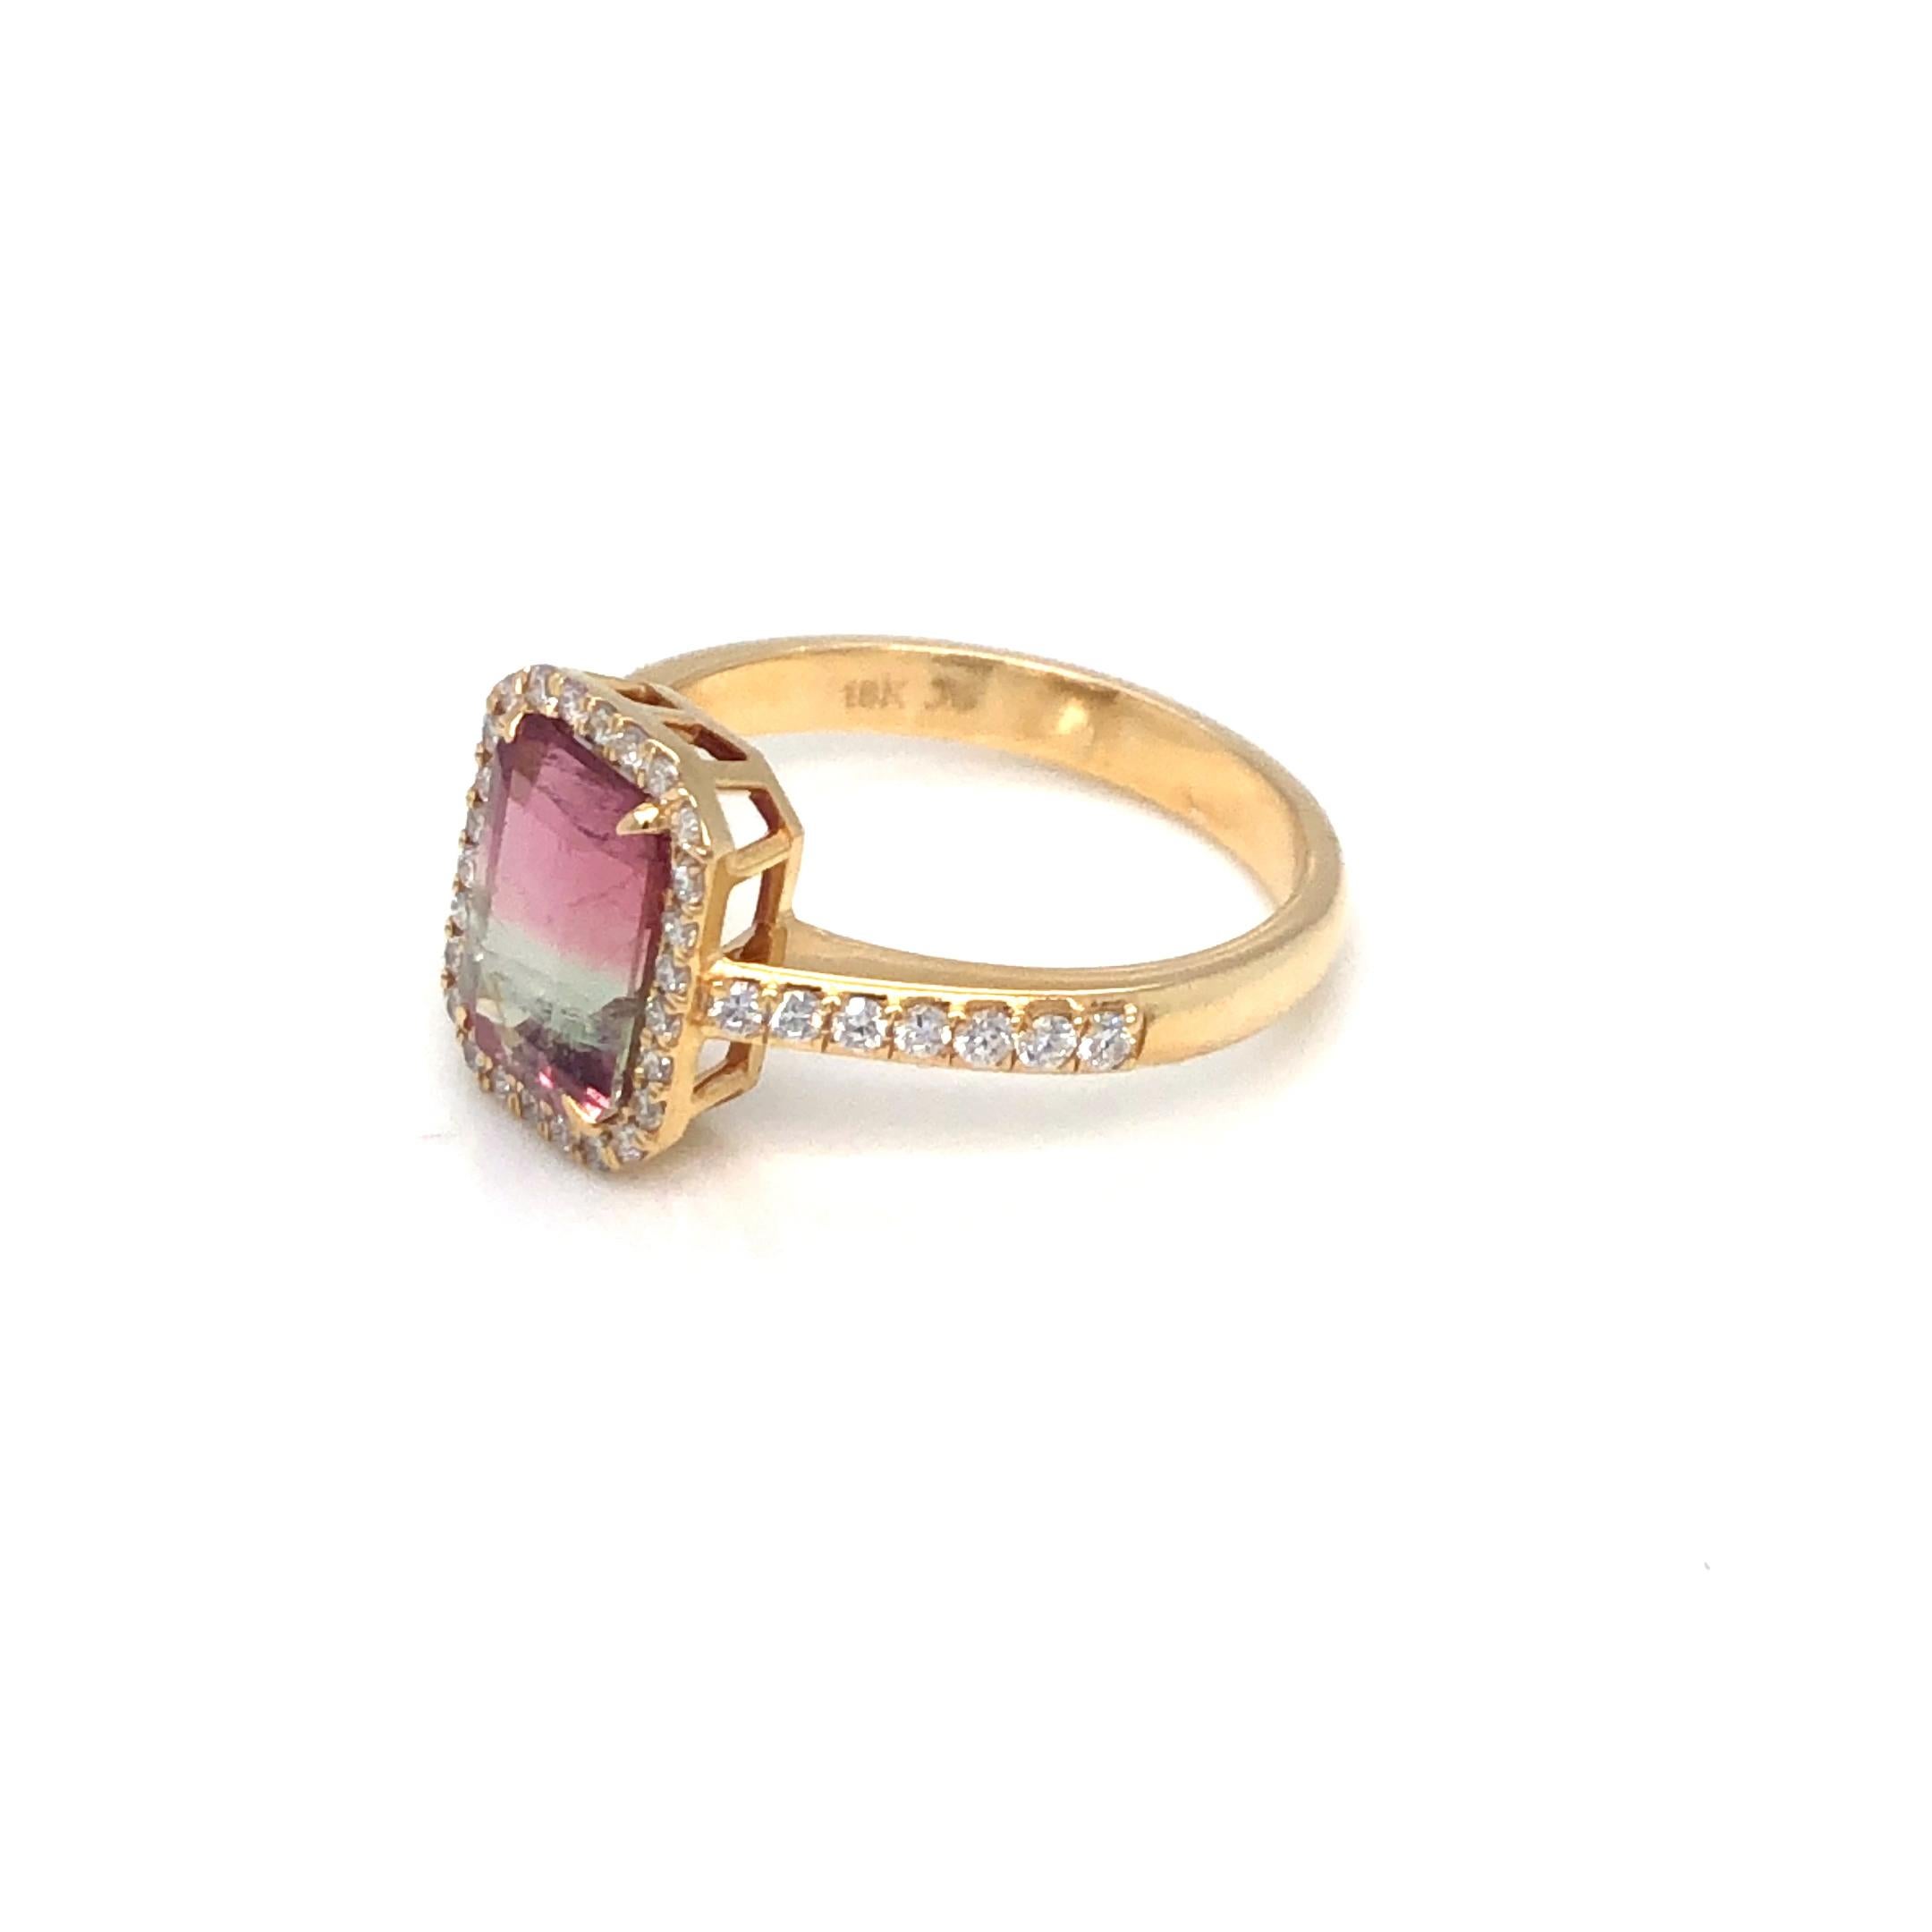 Emerald Cut Tourmaline and Diamond Ring 18K Yellow Gold For Sale